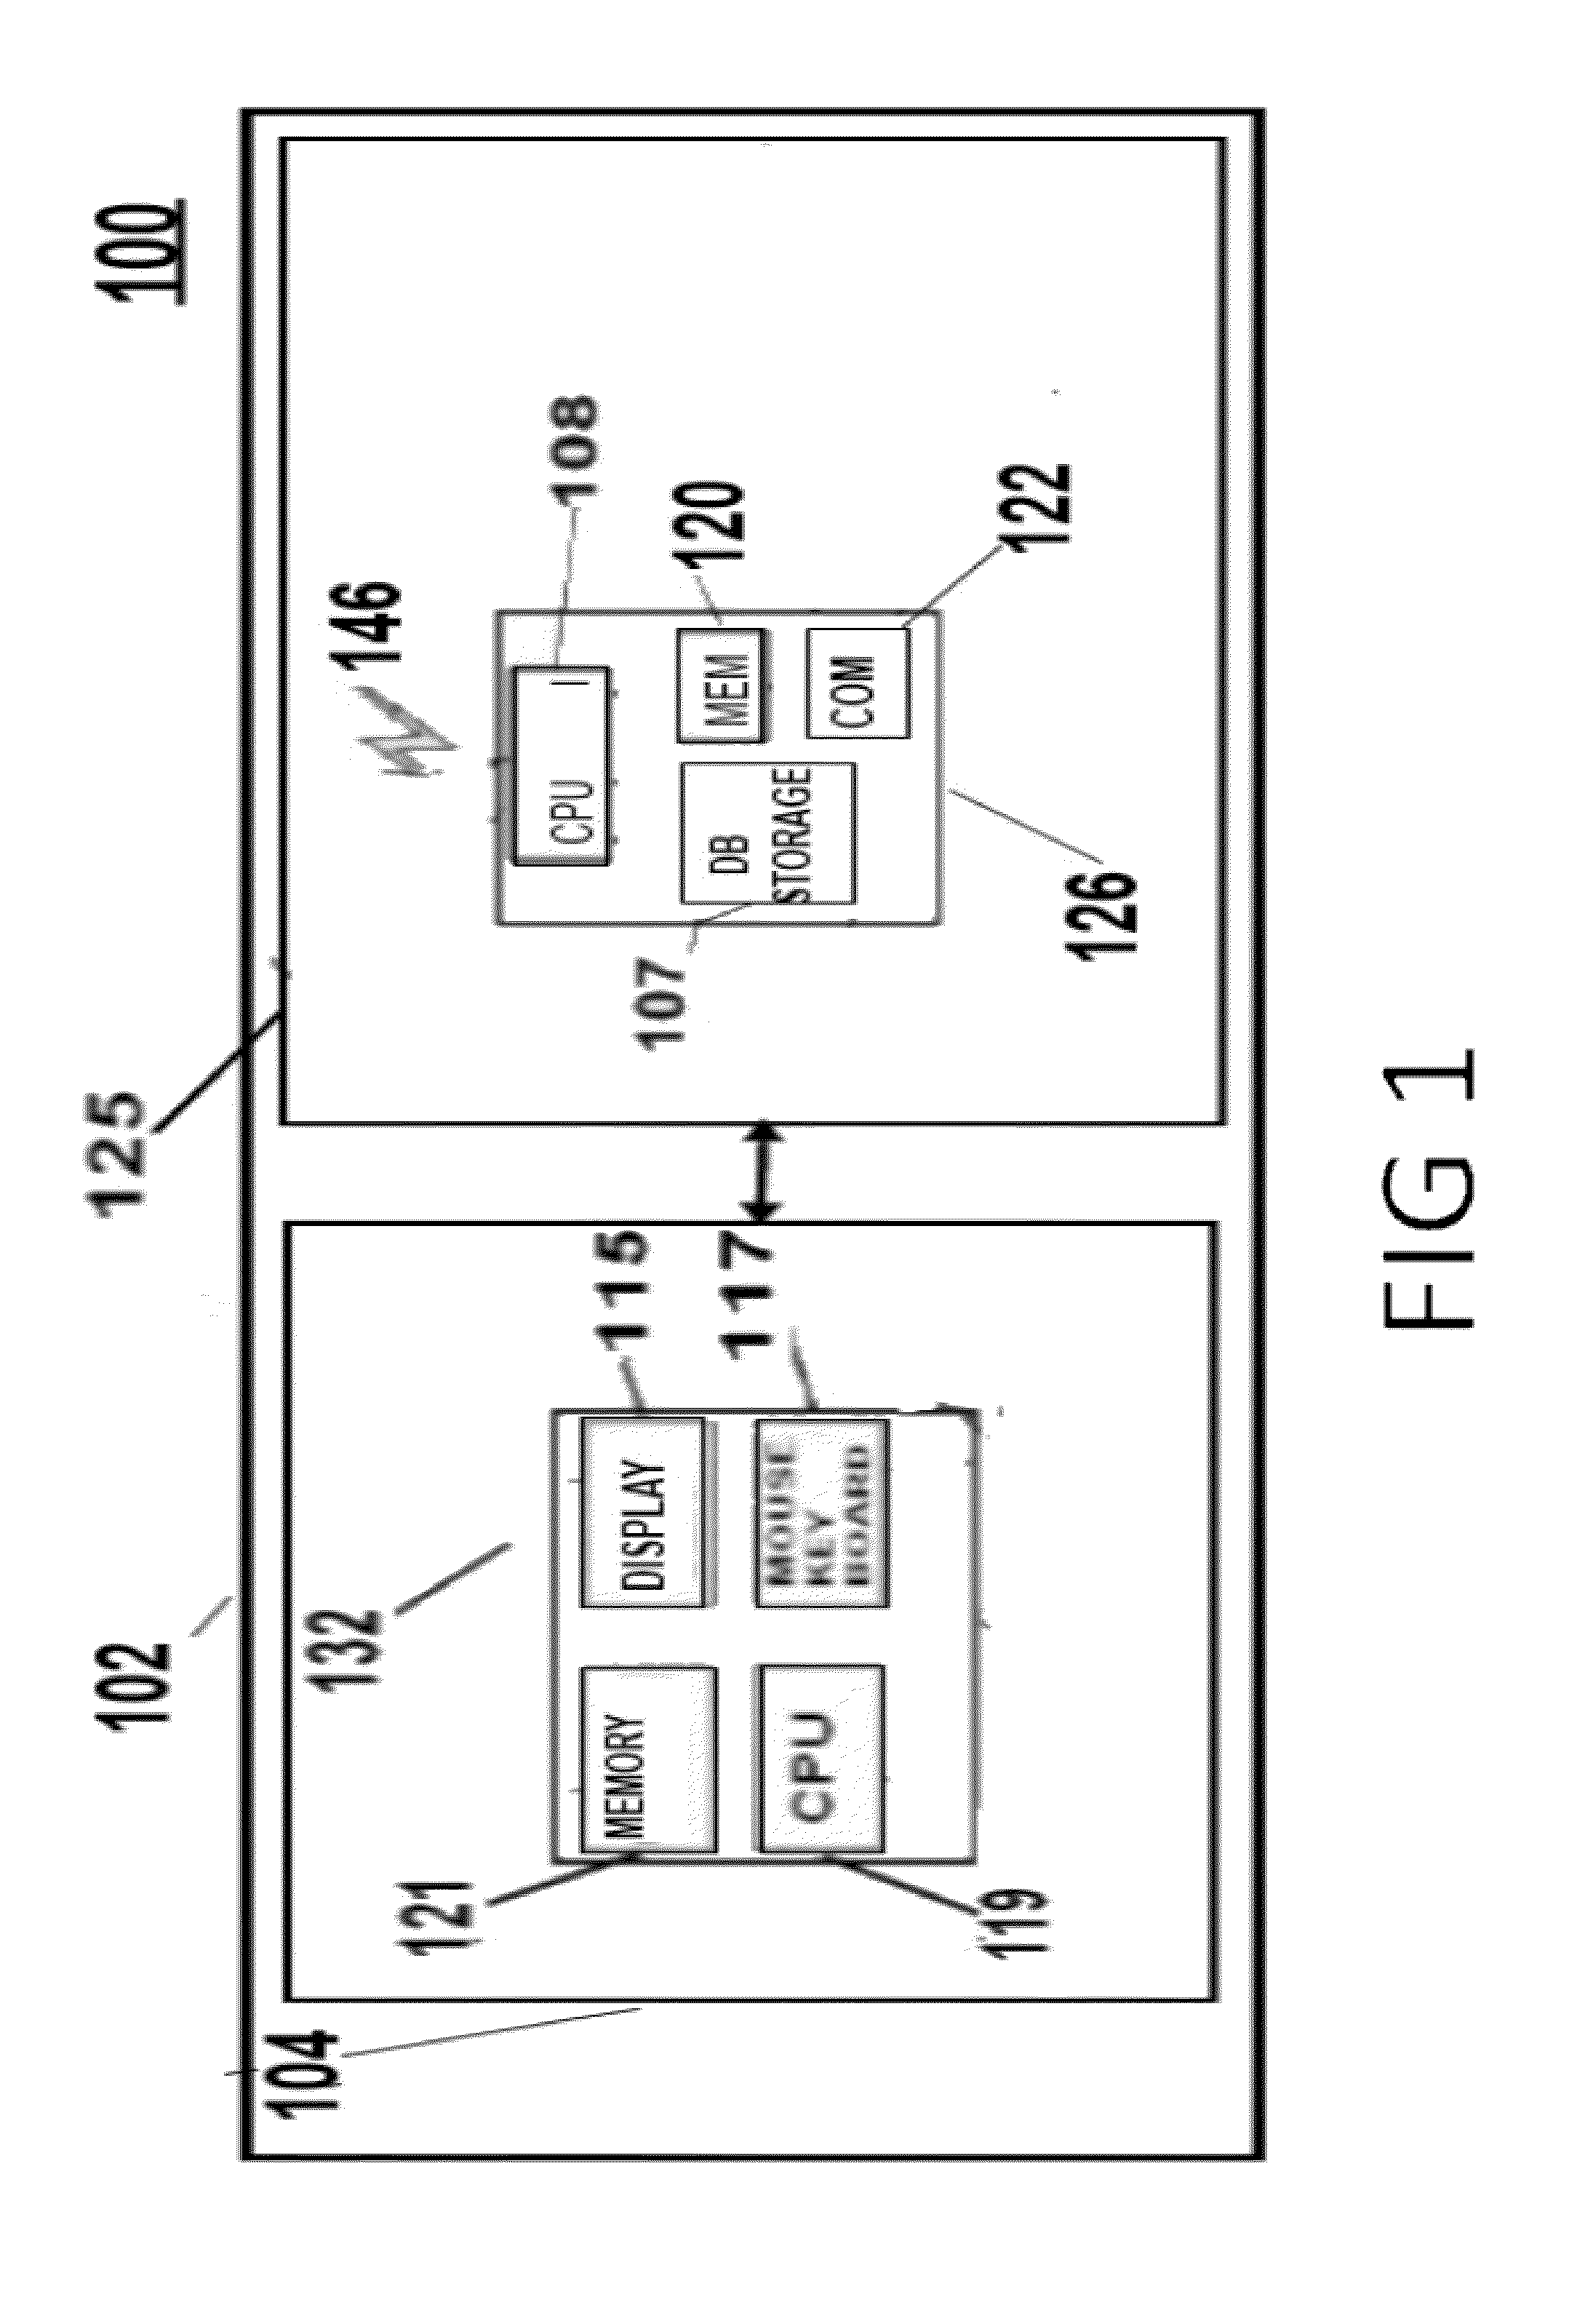 System and method for resilient automation upgrade